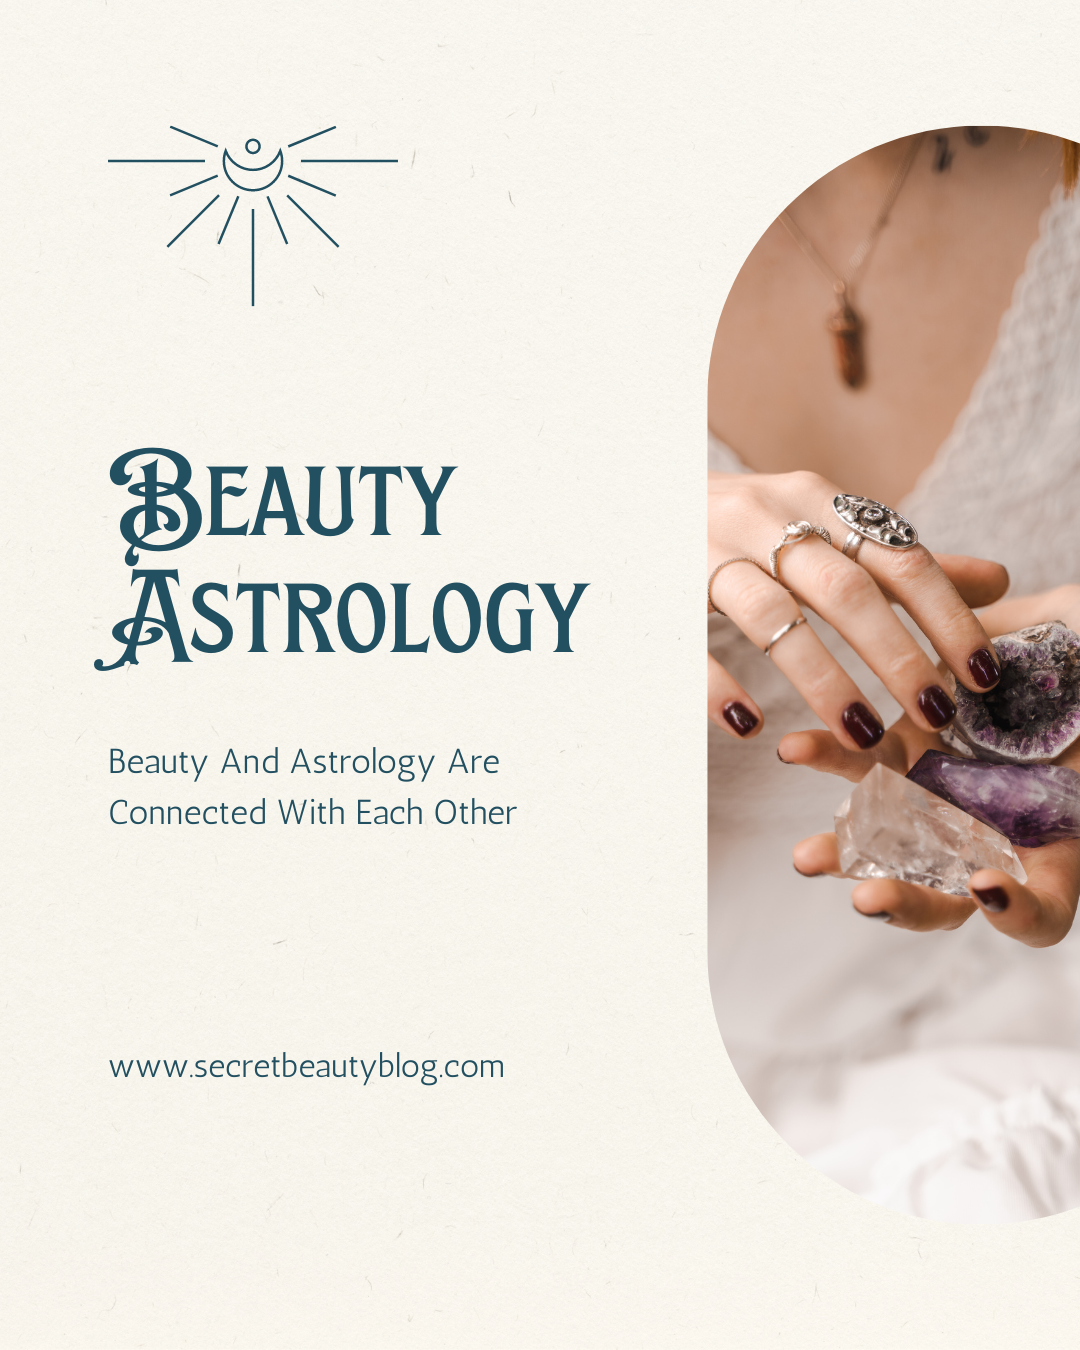 Beauty And Astrology Are Connected